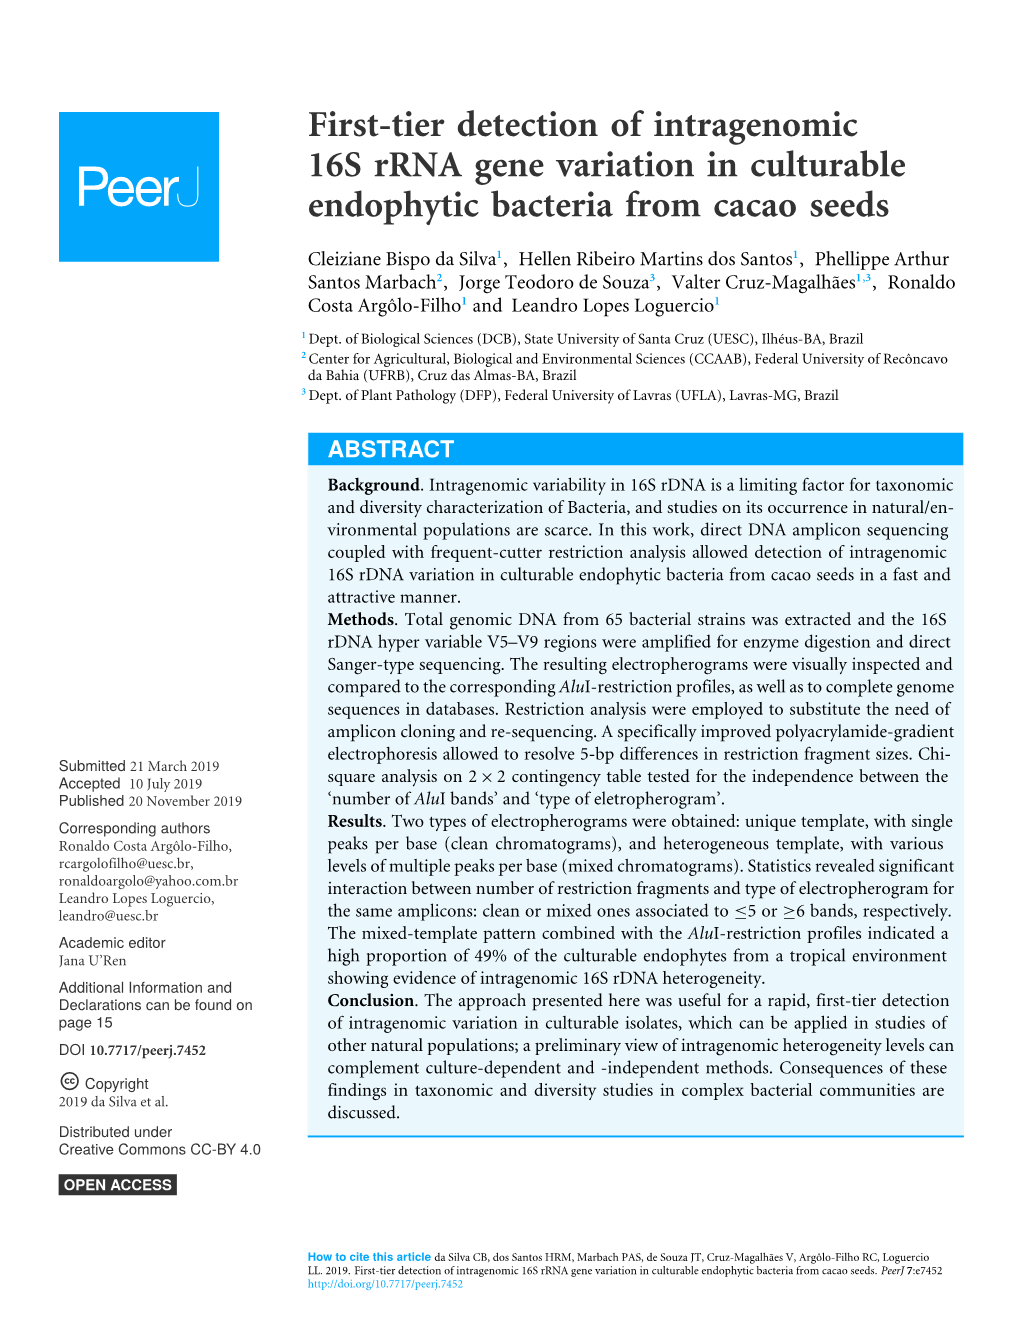 First-Tier Detection of Intragenomic 16S Rrna Gene Variation in Culturable Endophytic Bacteria from Cacao Seeds